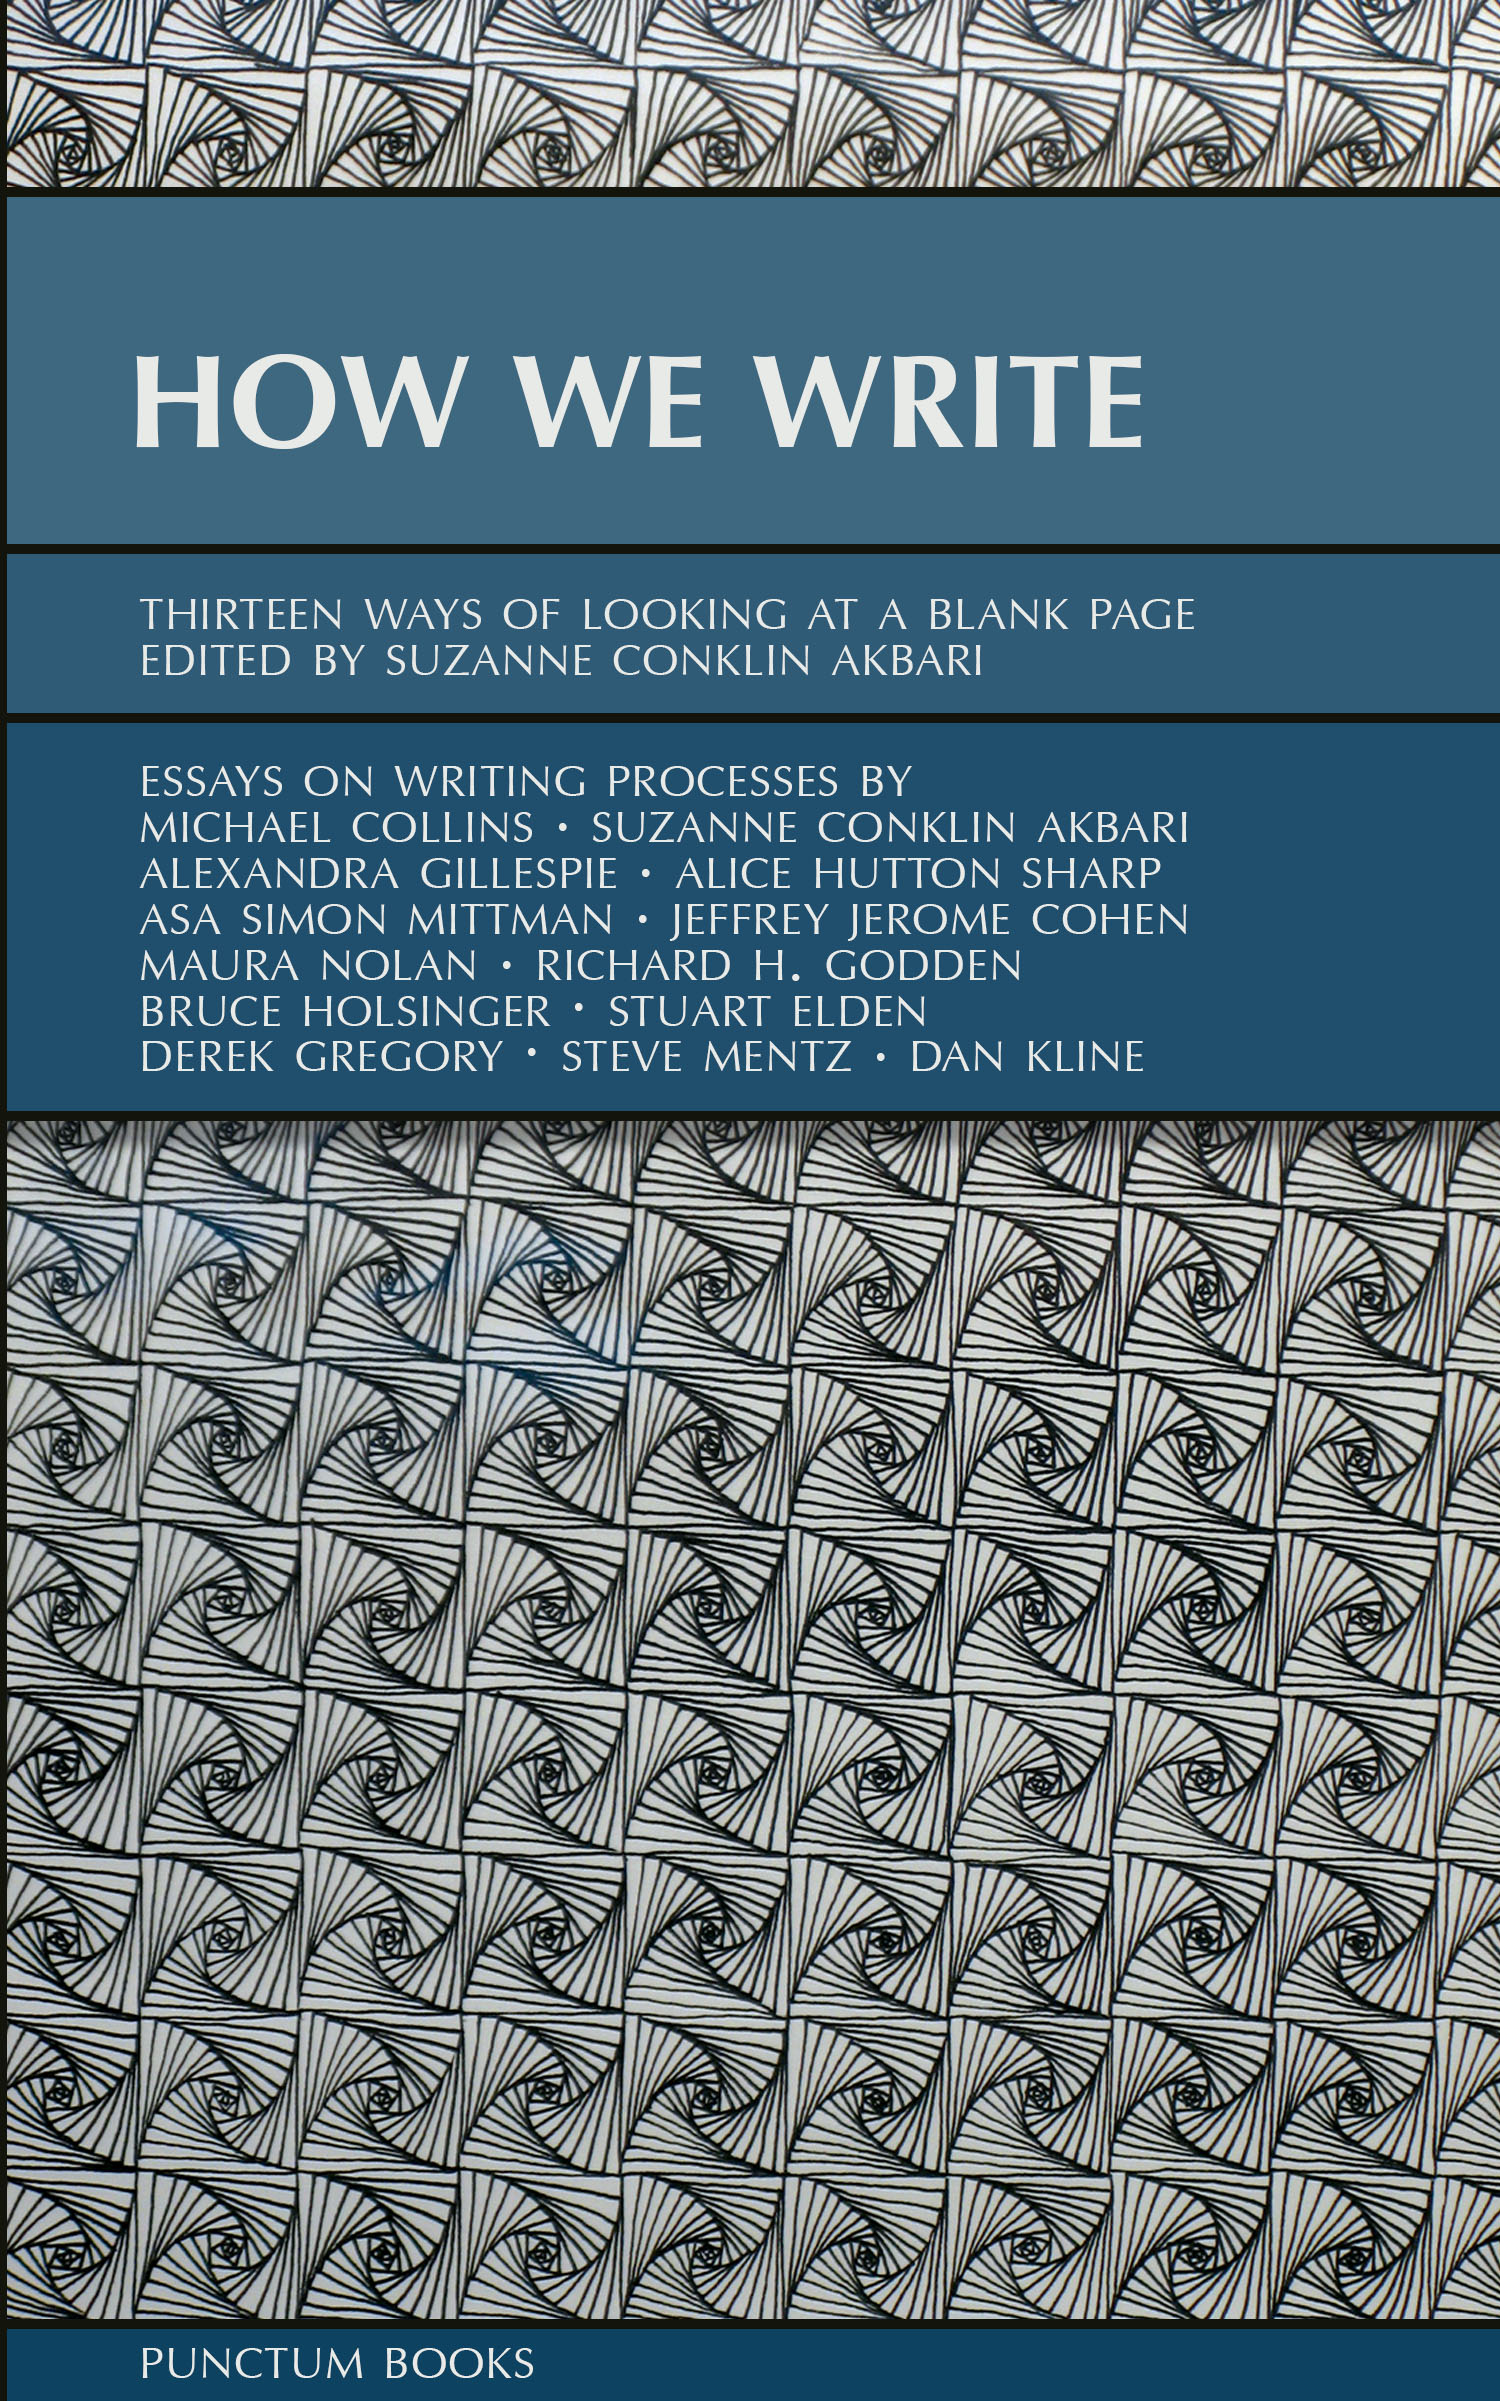 How We Write: Thirteen Ways of Looking at a Blank Page (punctum books, 2015)